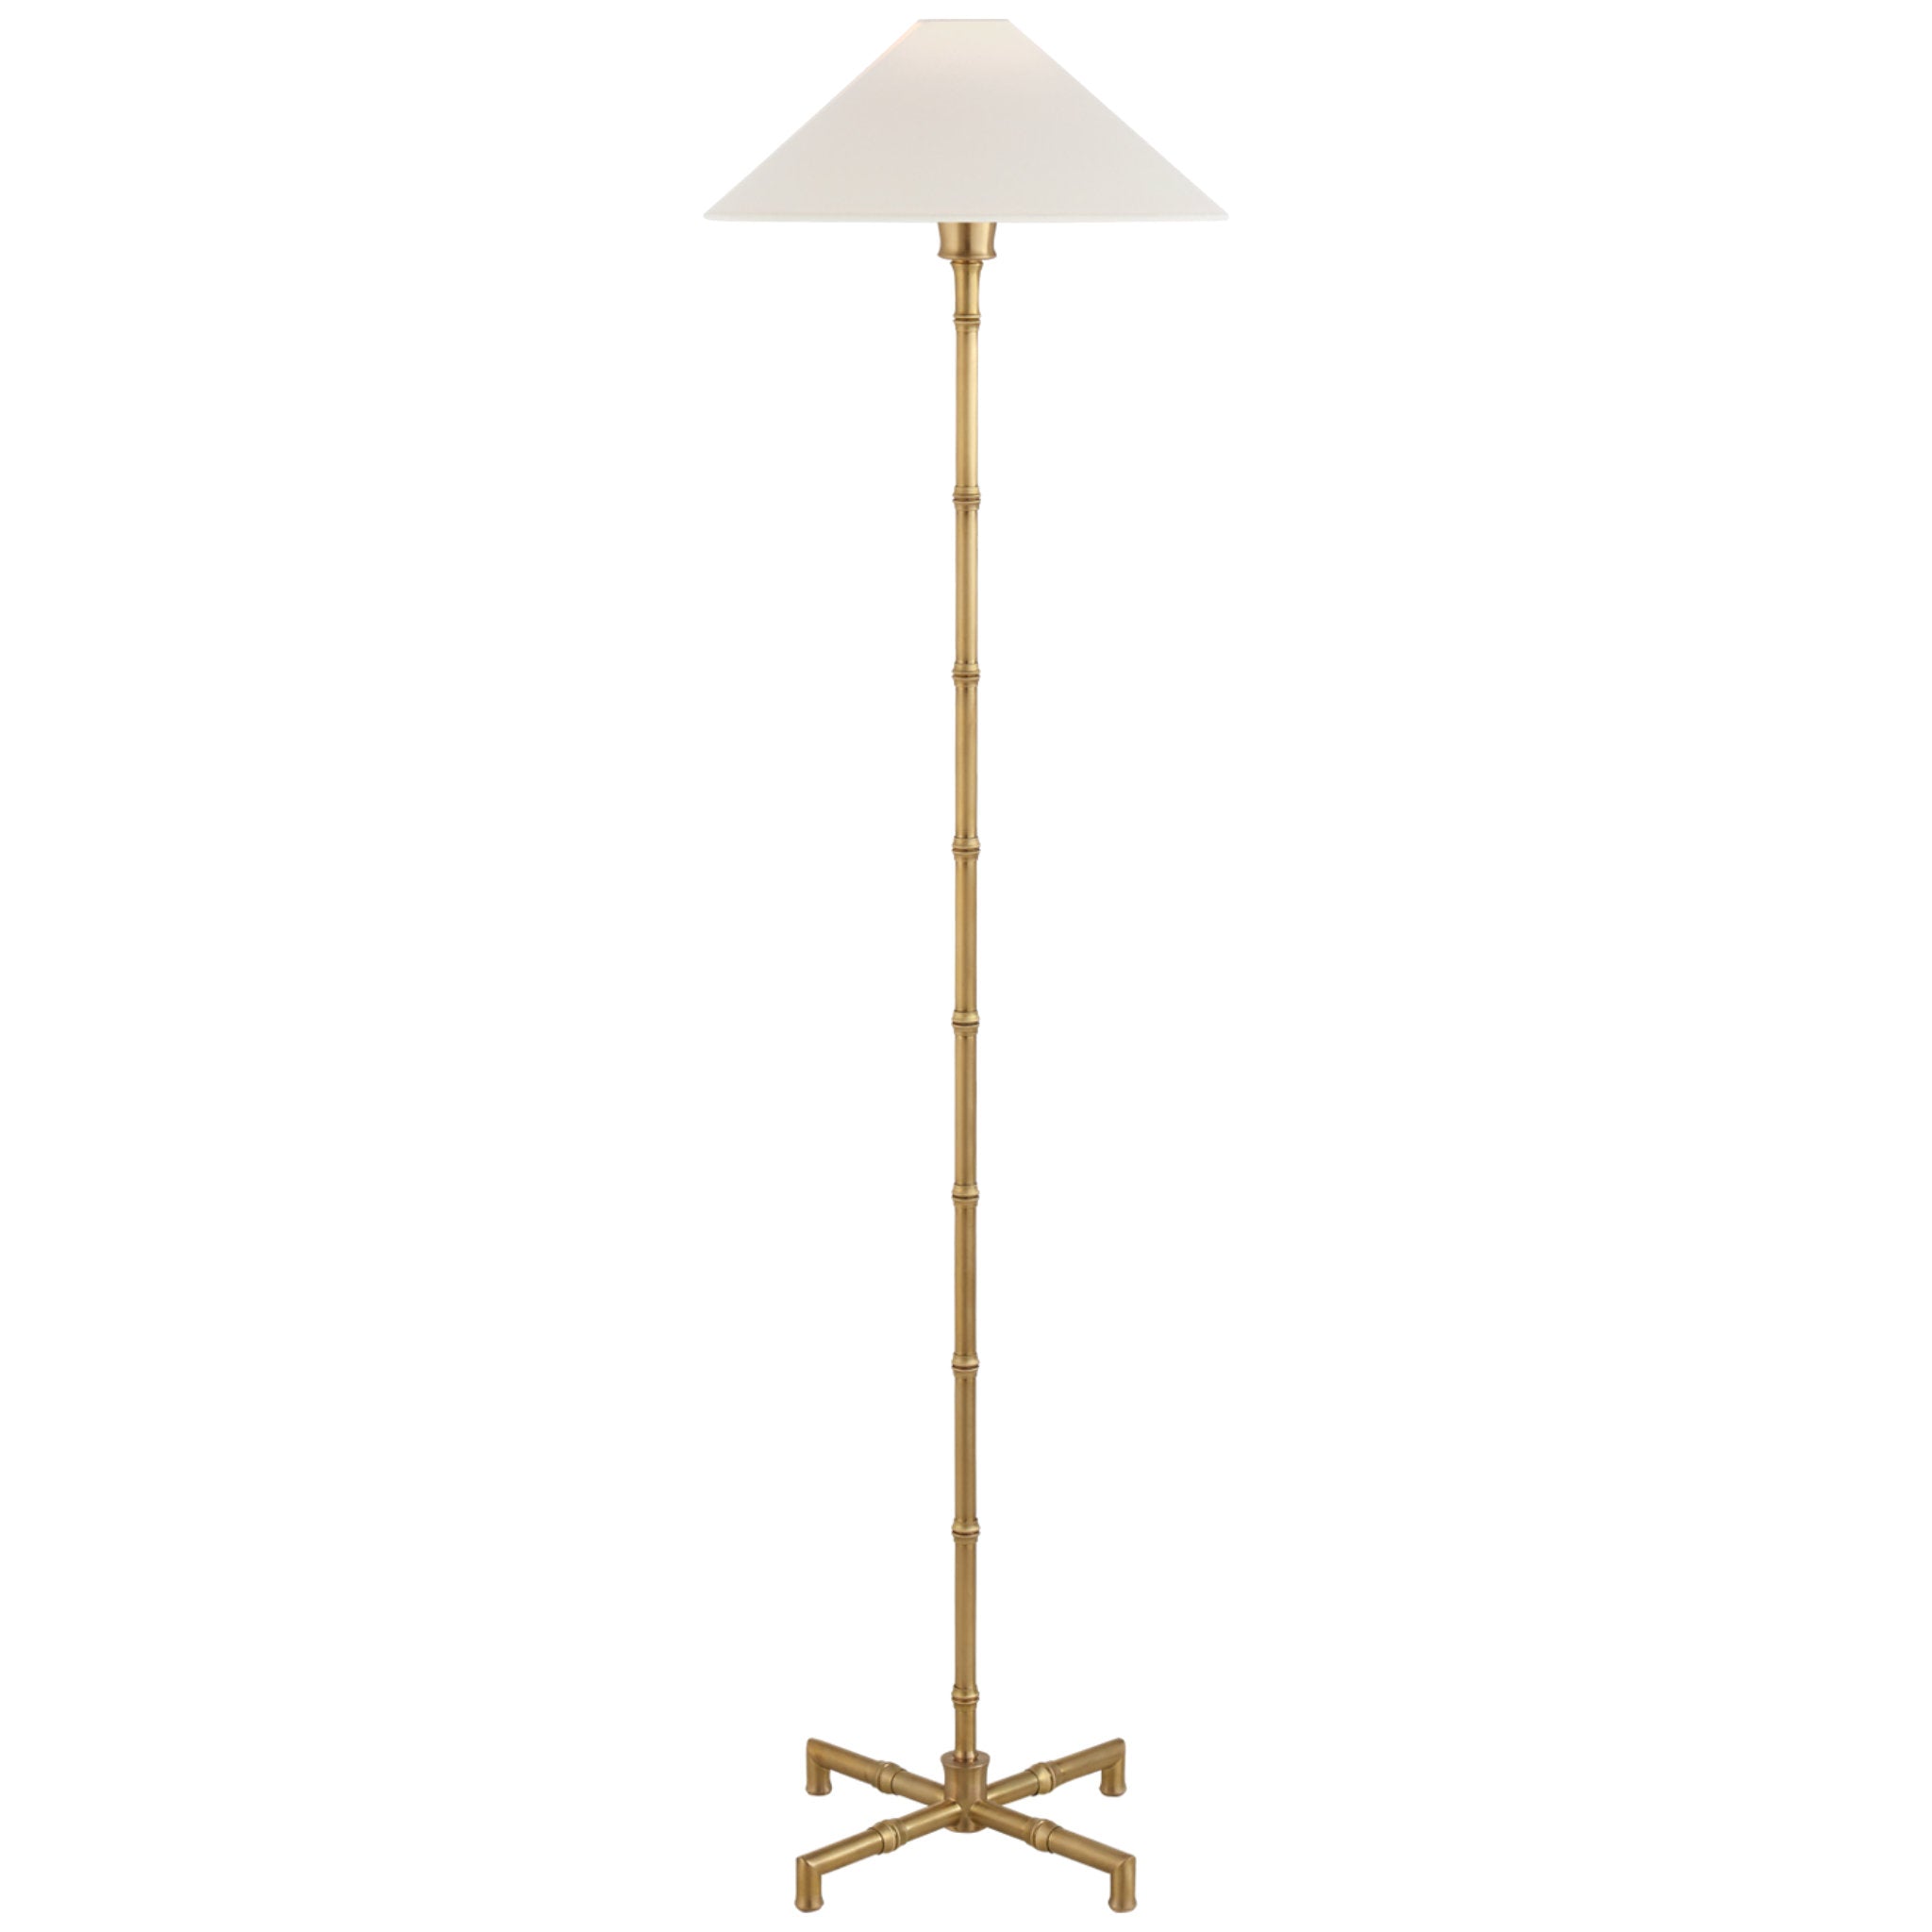 Visual Comfort Grenol Floor Lamp in Hand-Rubbed Antique Brass with Linen Shade